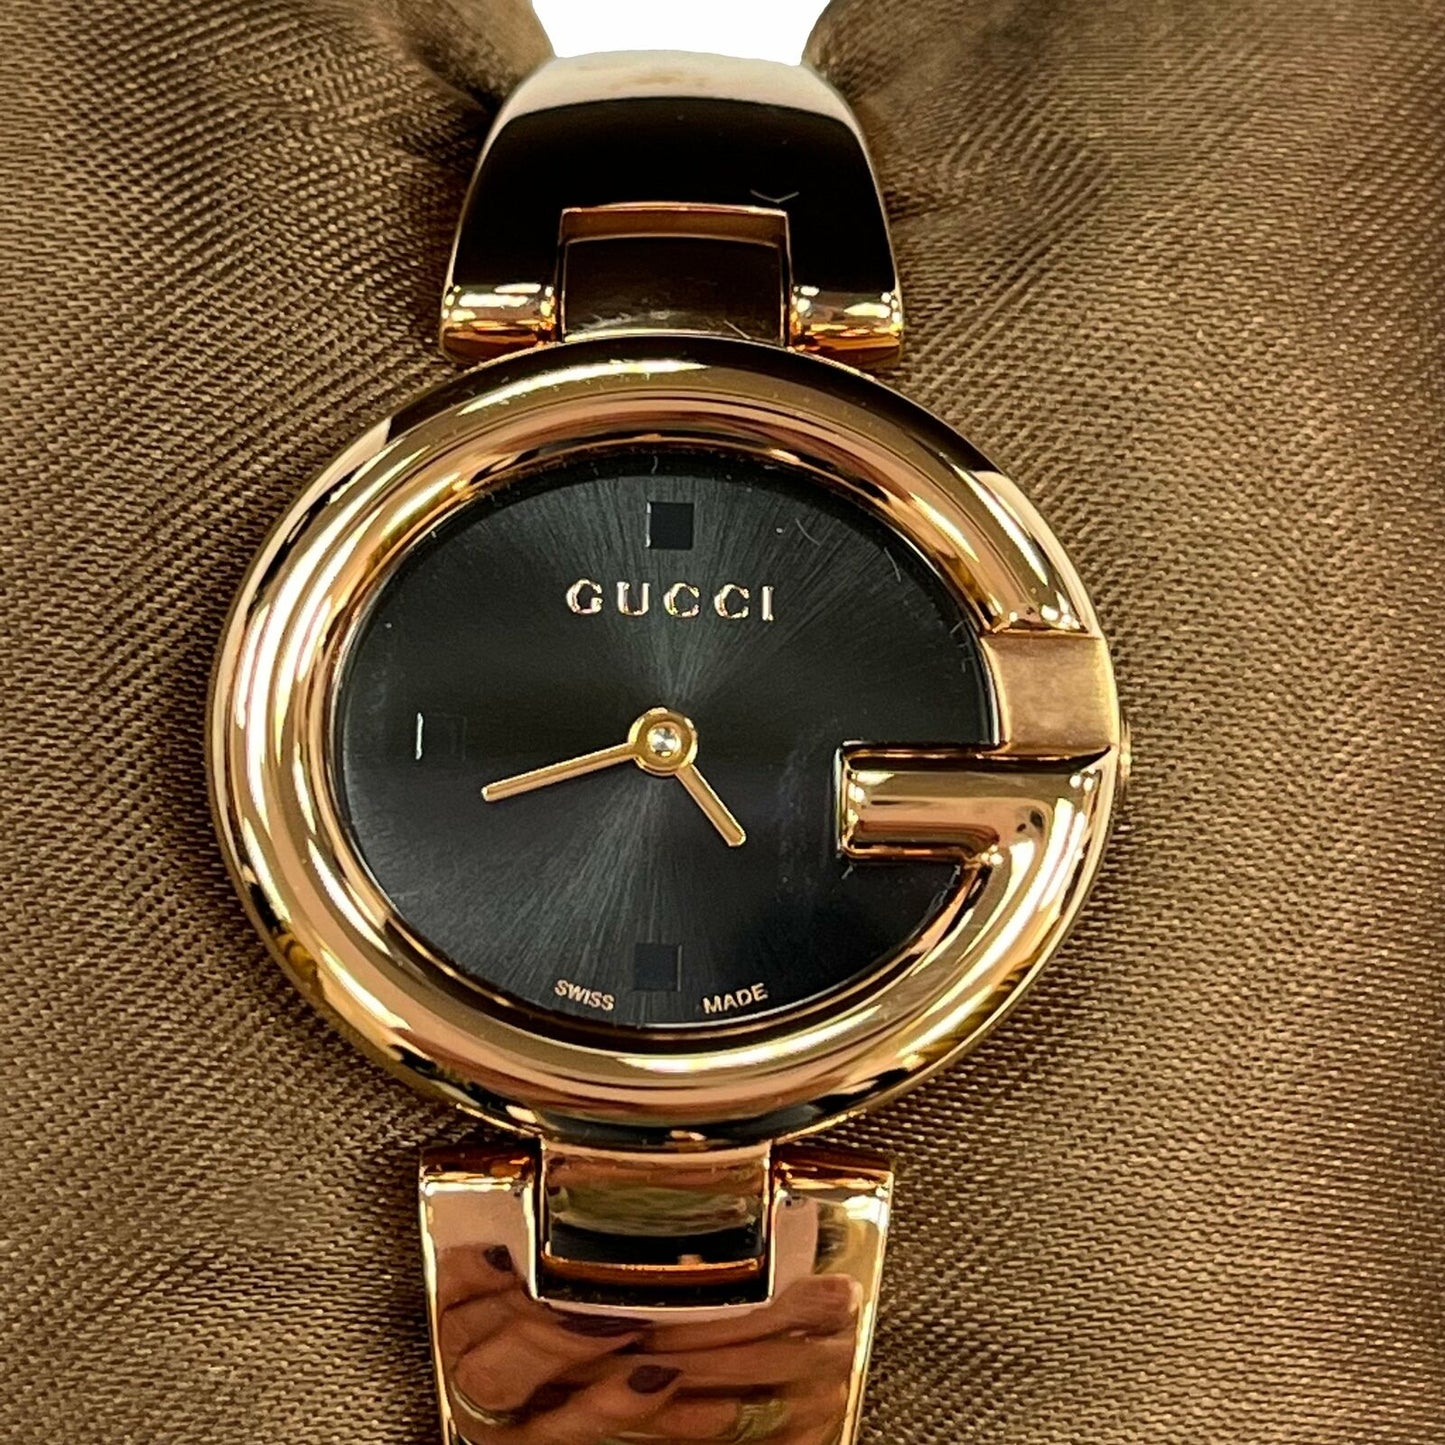 GUCCI Ladies Watch Rose Gold